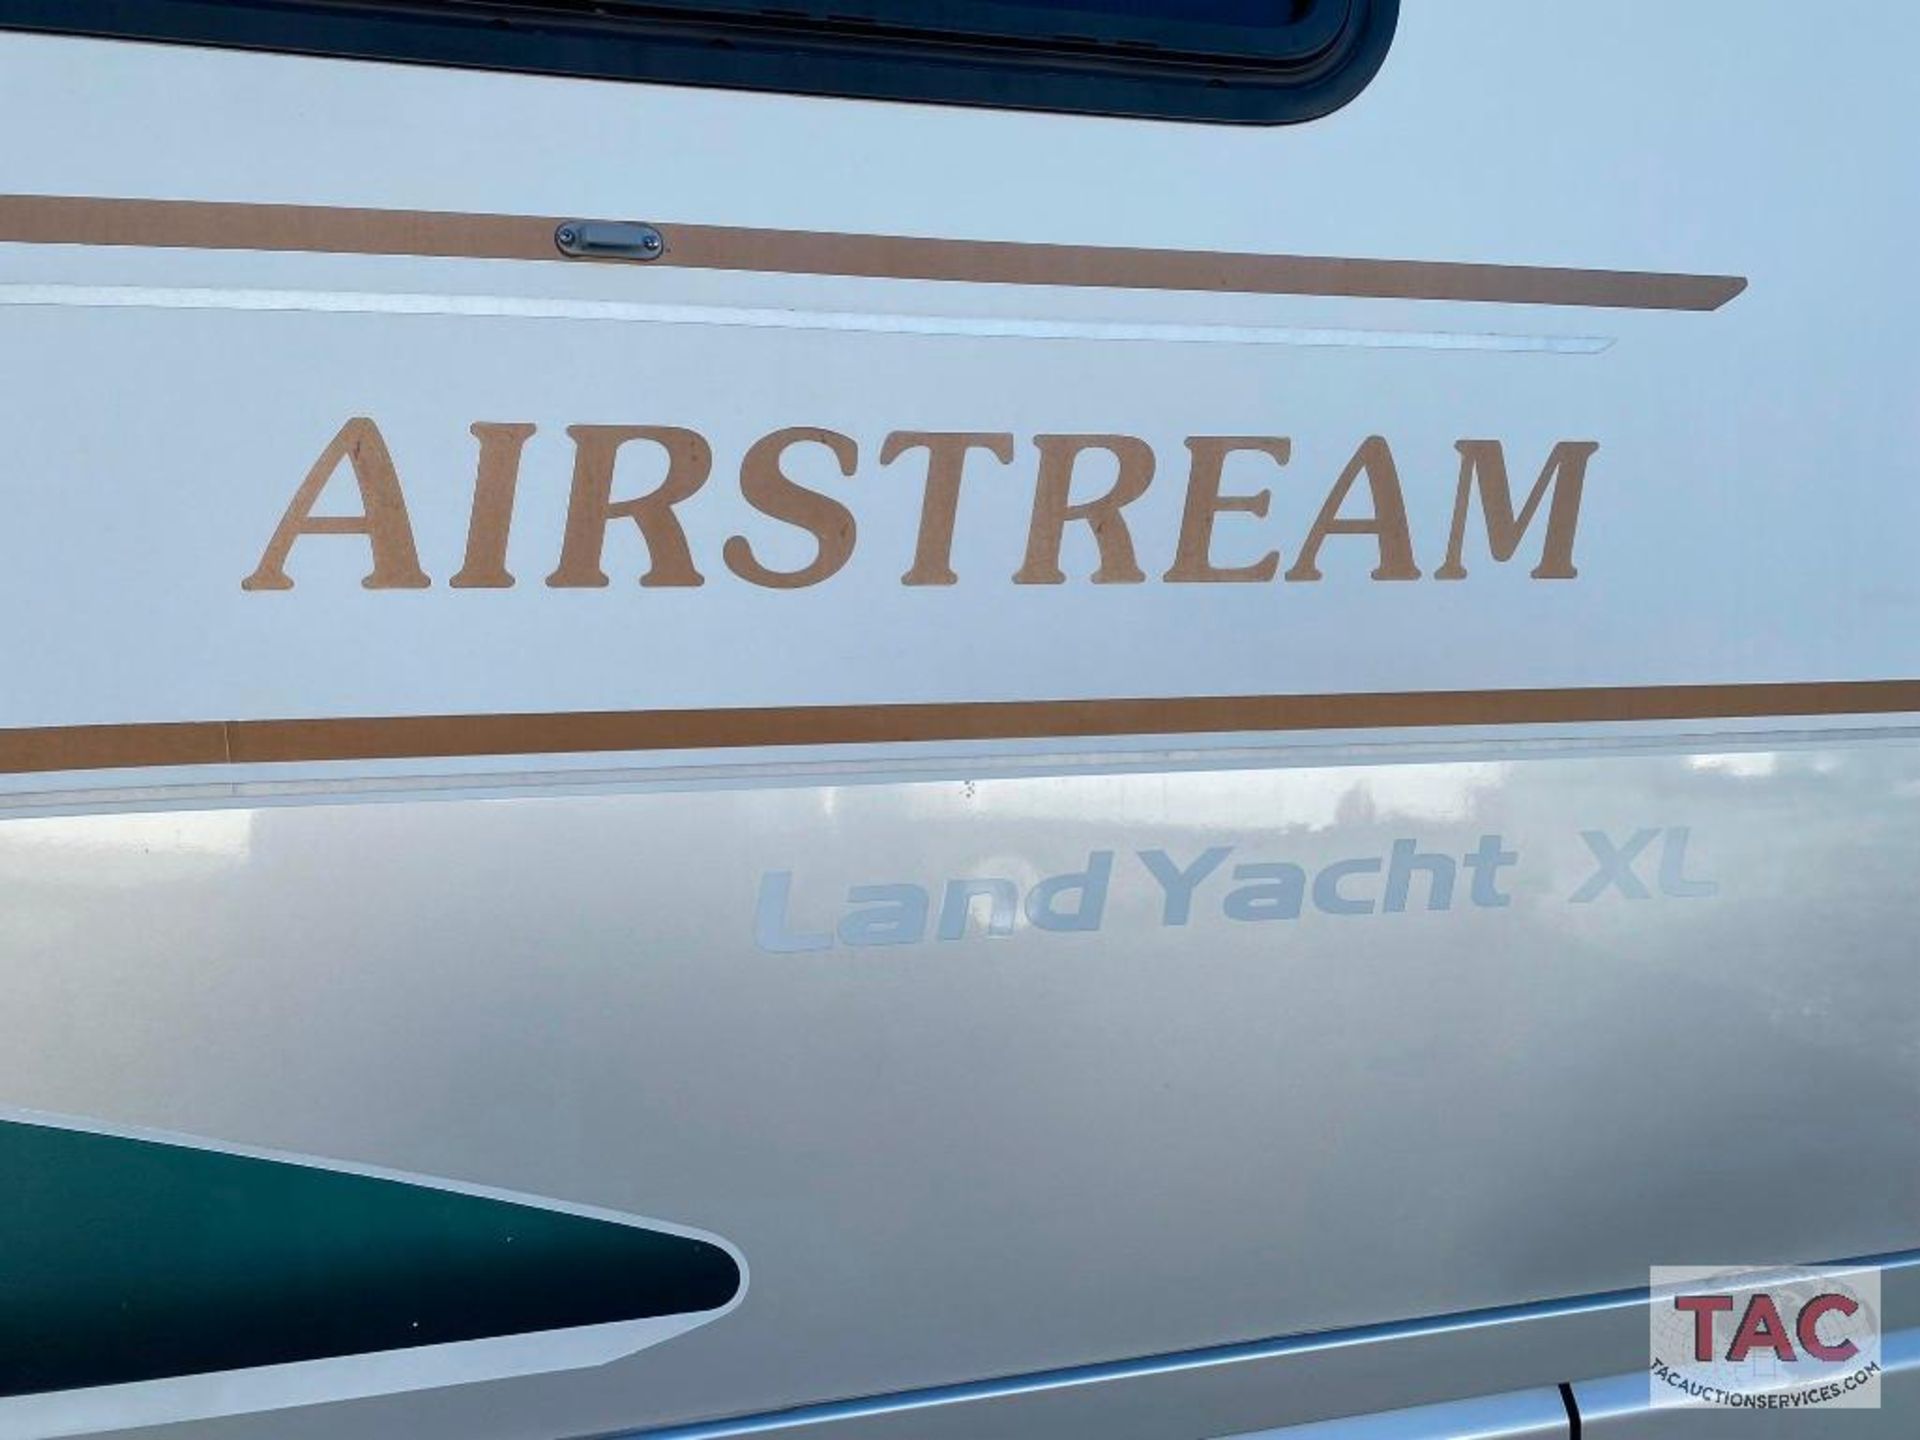 1999 Airstream Land Yacht XL 355 Motor Home - Image 76 of 79